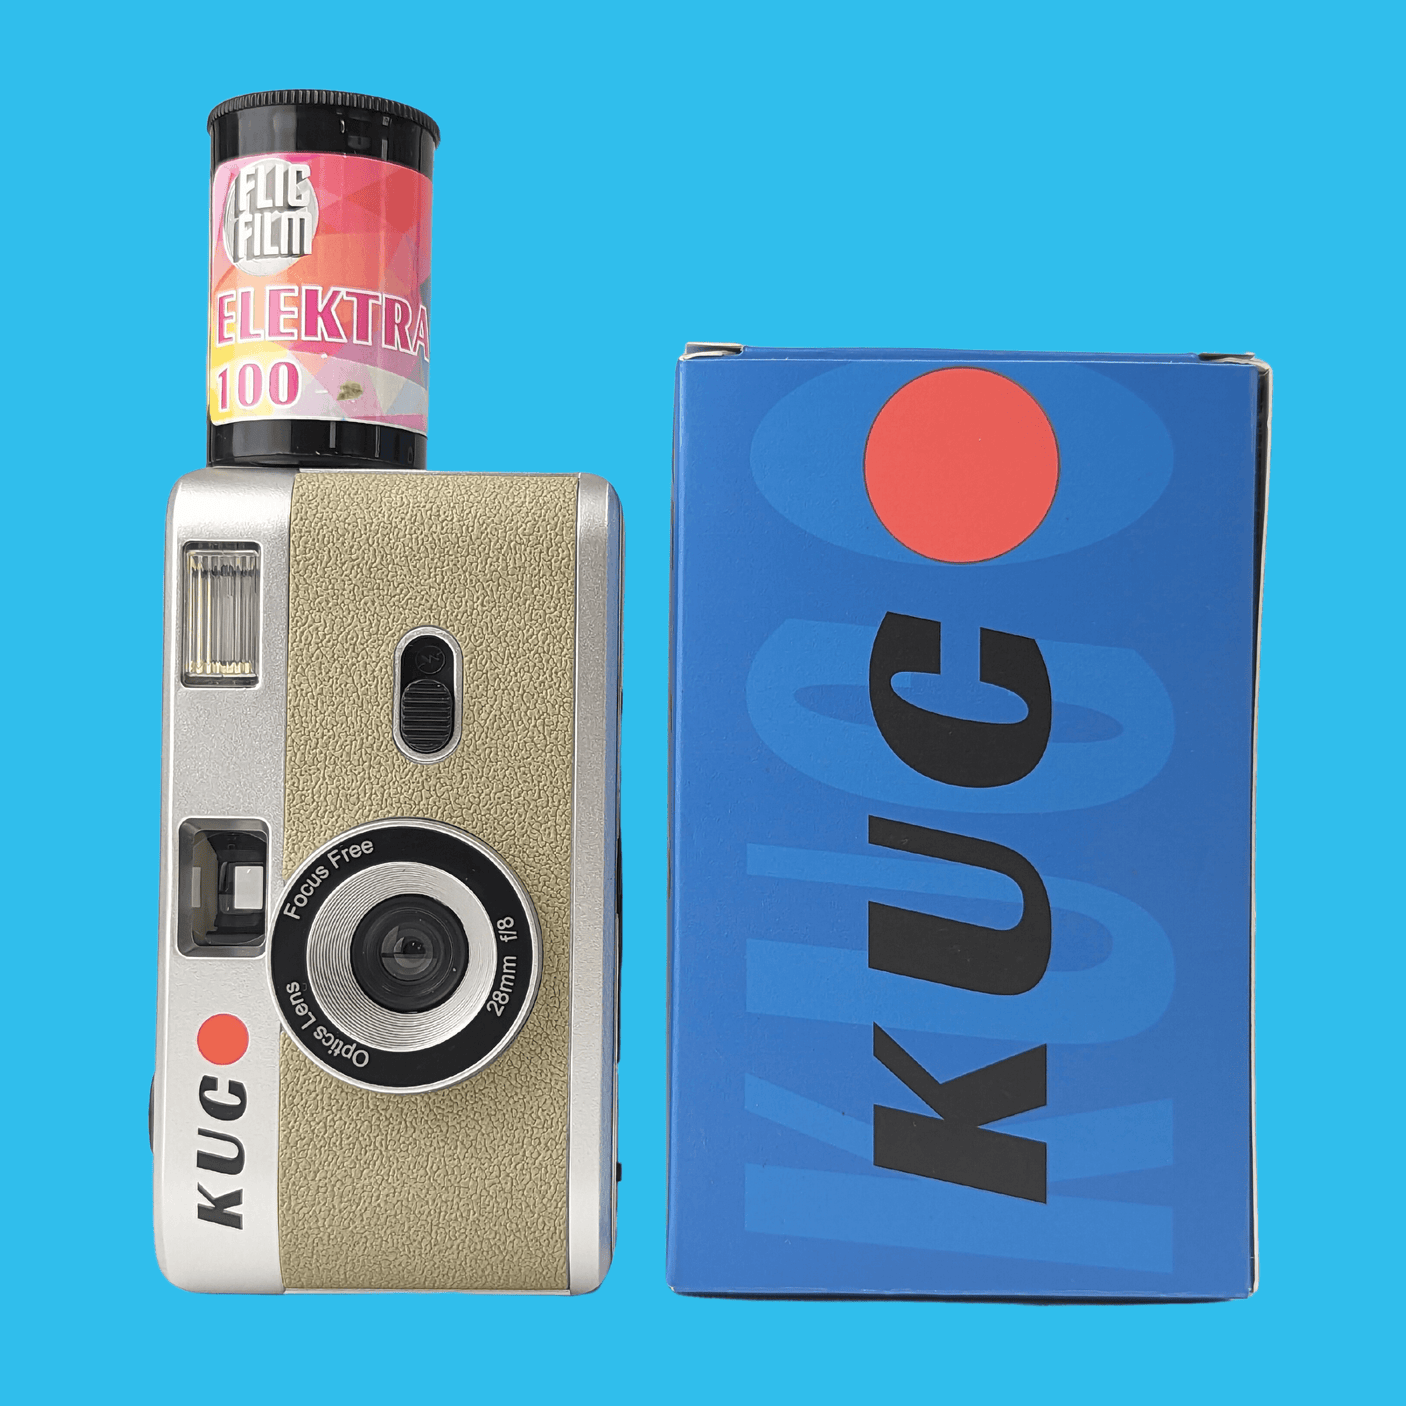 35mm Film Camera Reusable Starter Pack with Flash and 1 x 35mm Film - Silver KUGO